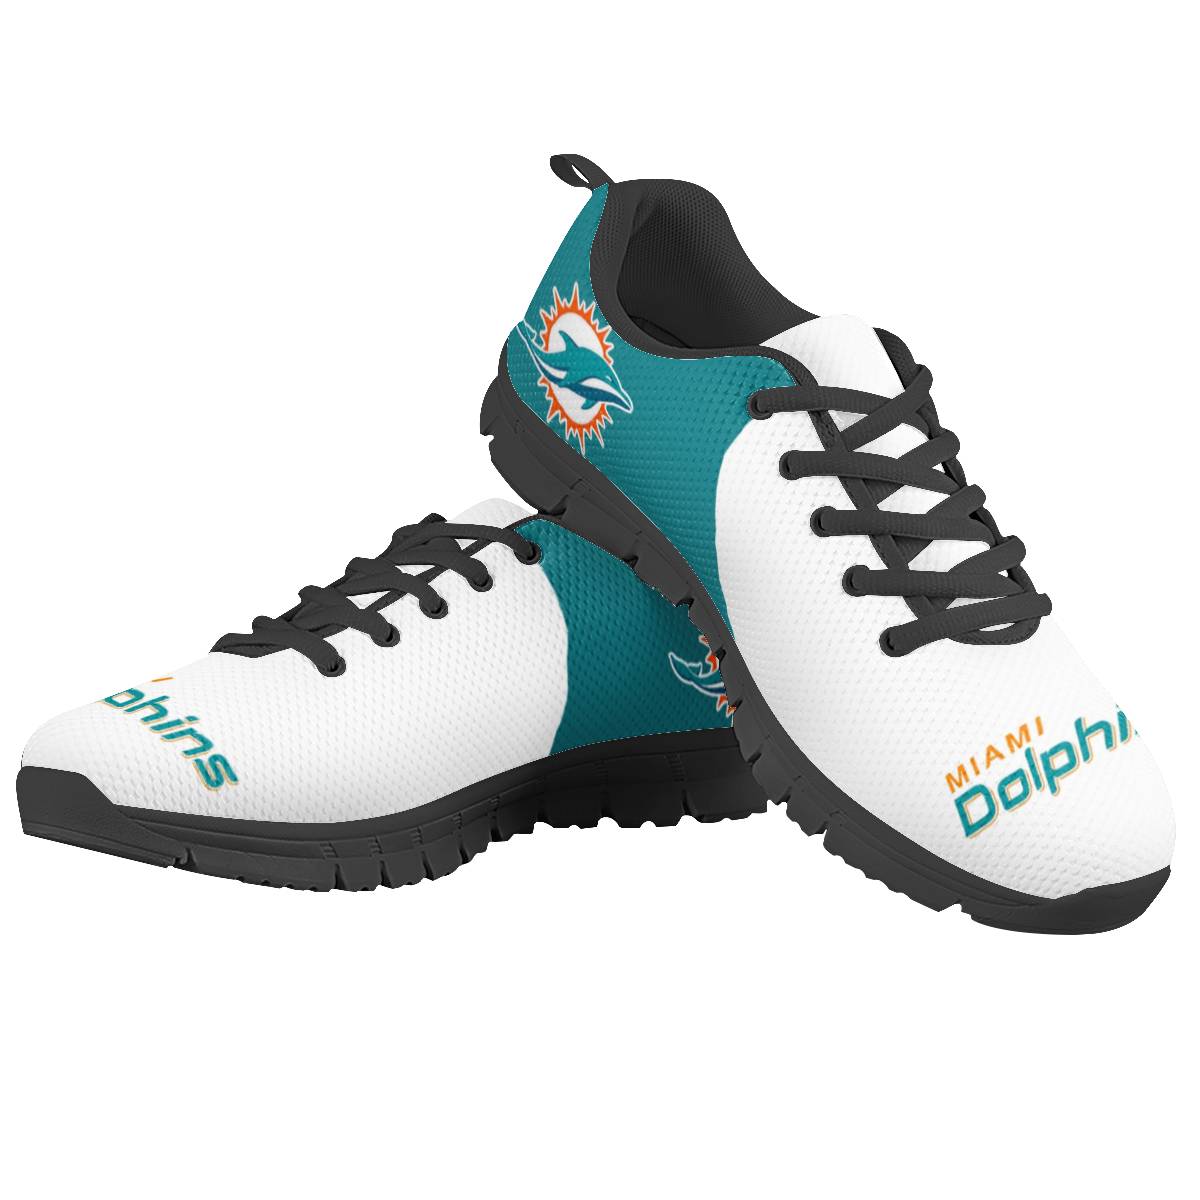 Men's Miami Dolphins AQ Running Shoes 003